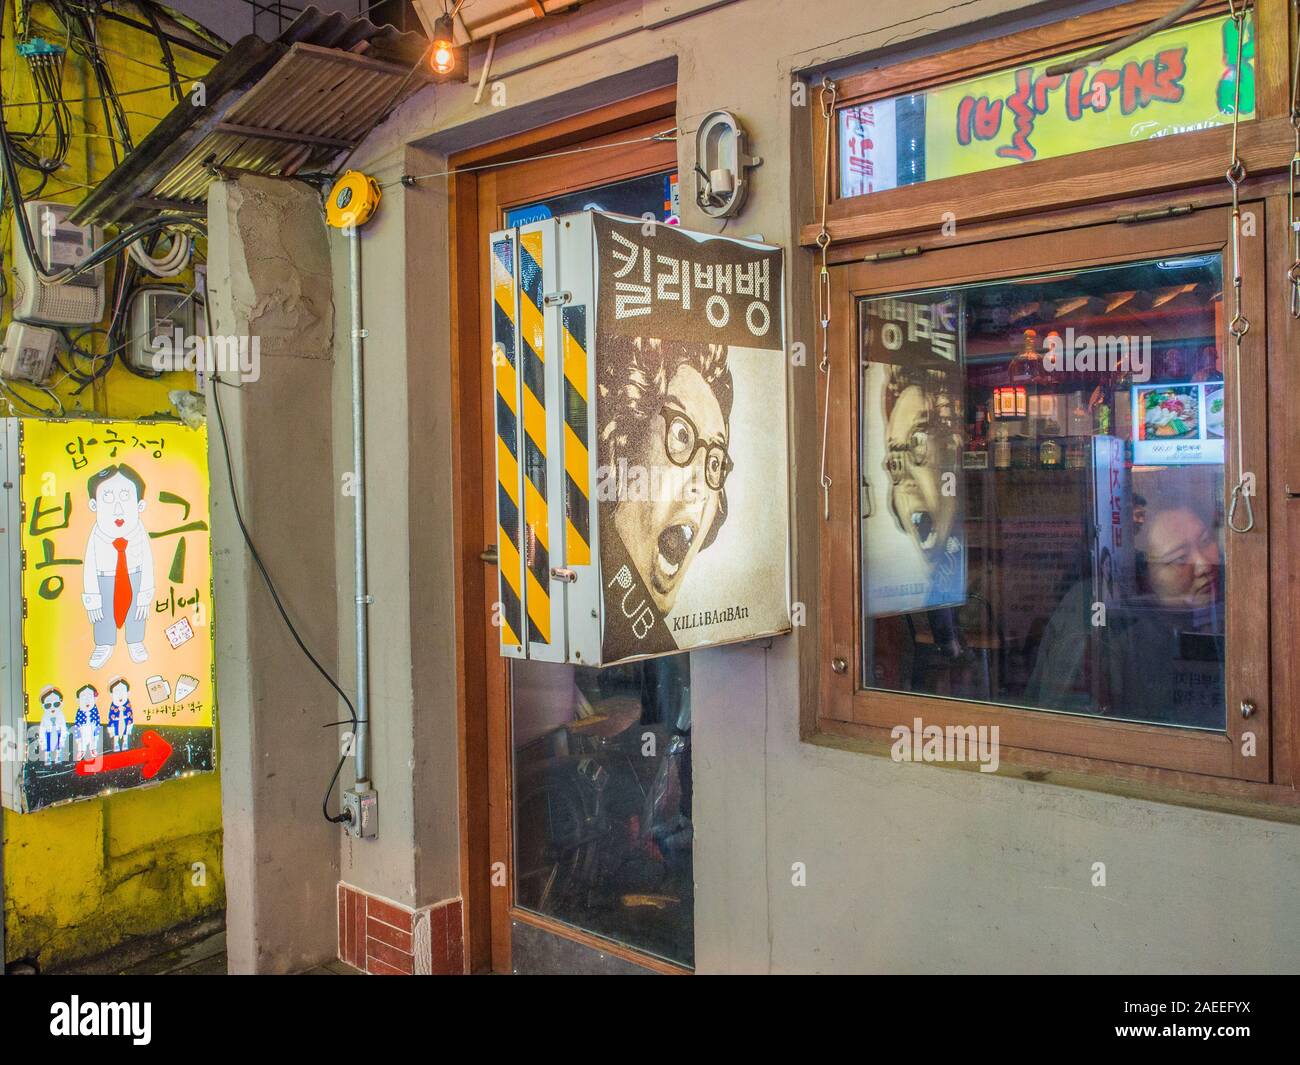 Advertising signs and reflections in window of bar, night street, Gyeongbokgung, Seoul, South Korea Stock Photo